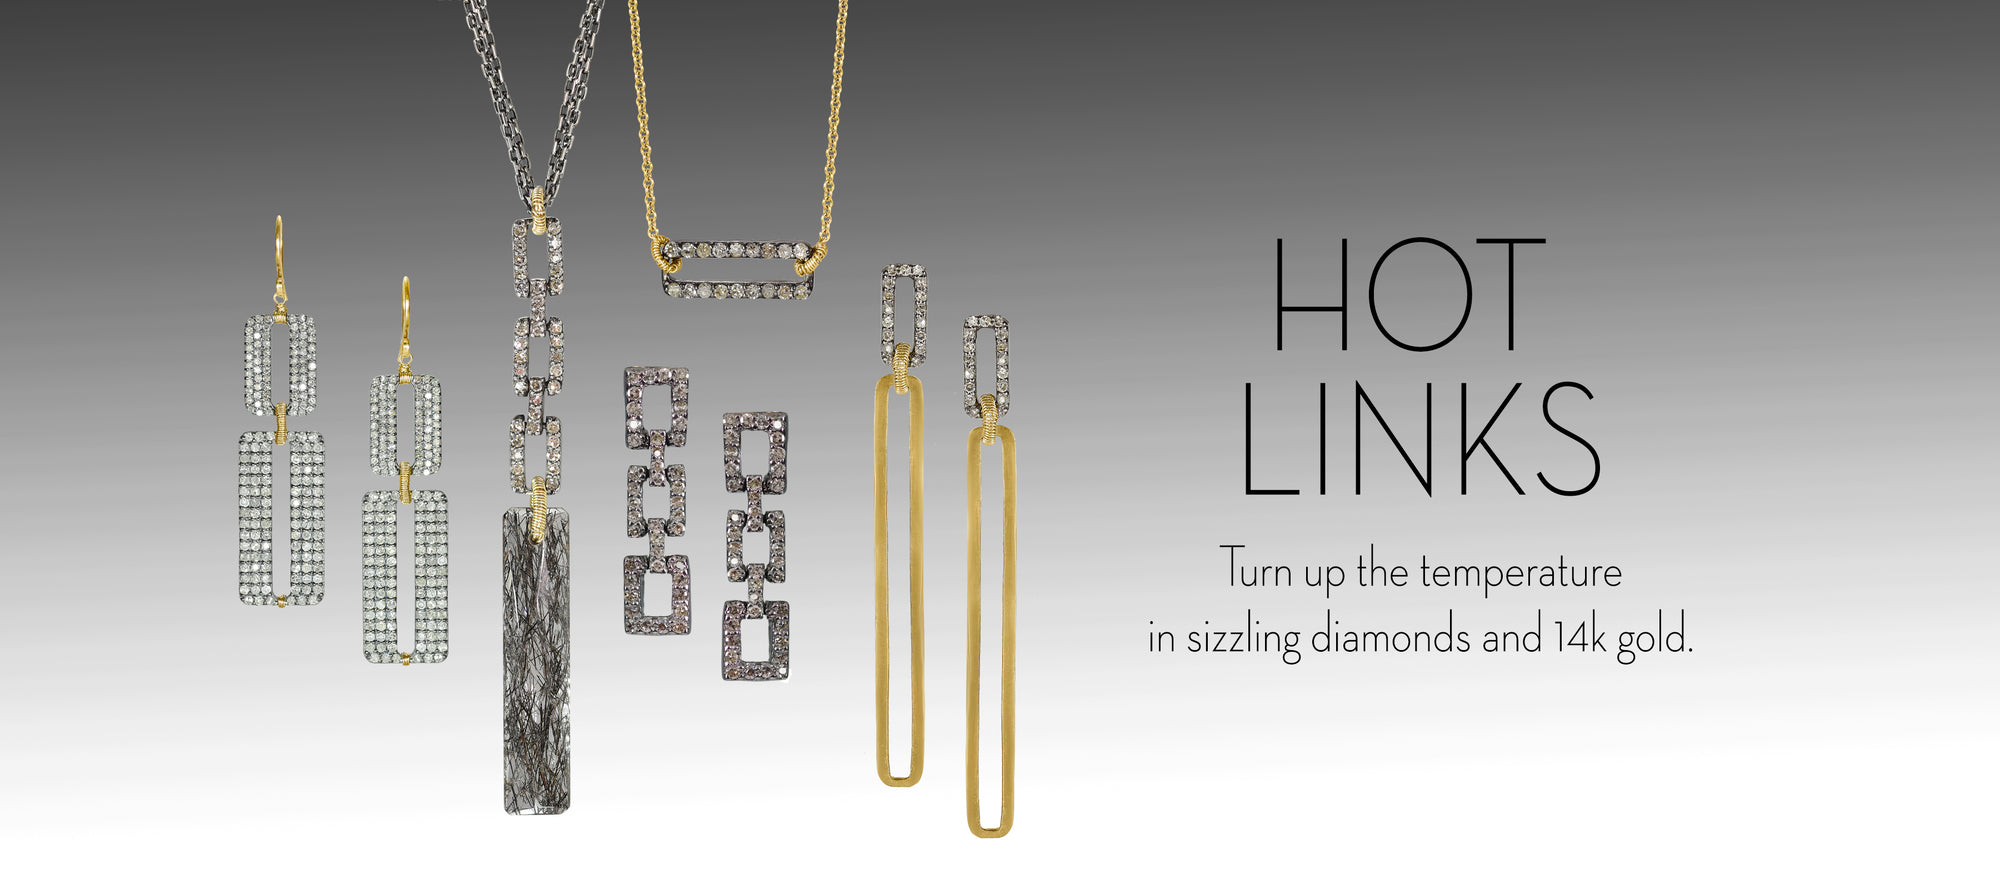 Hot Links. Turn up the temperature with sizzling diamond and 14k gold.